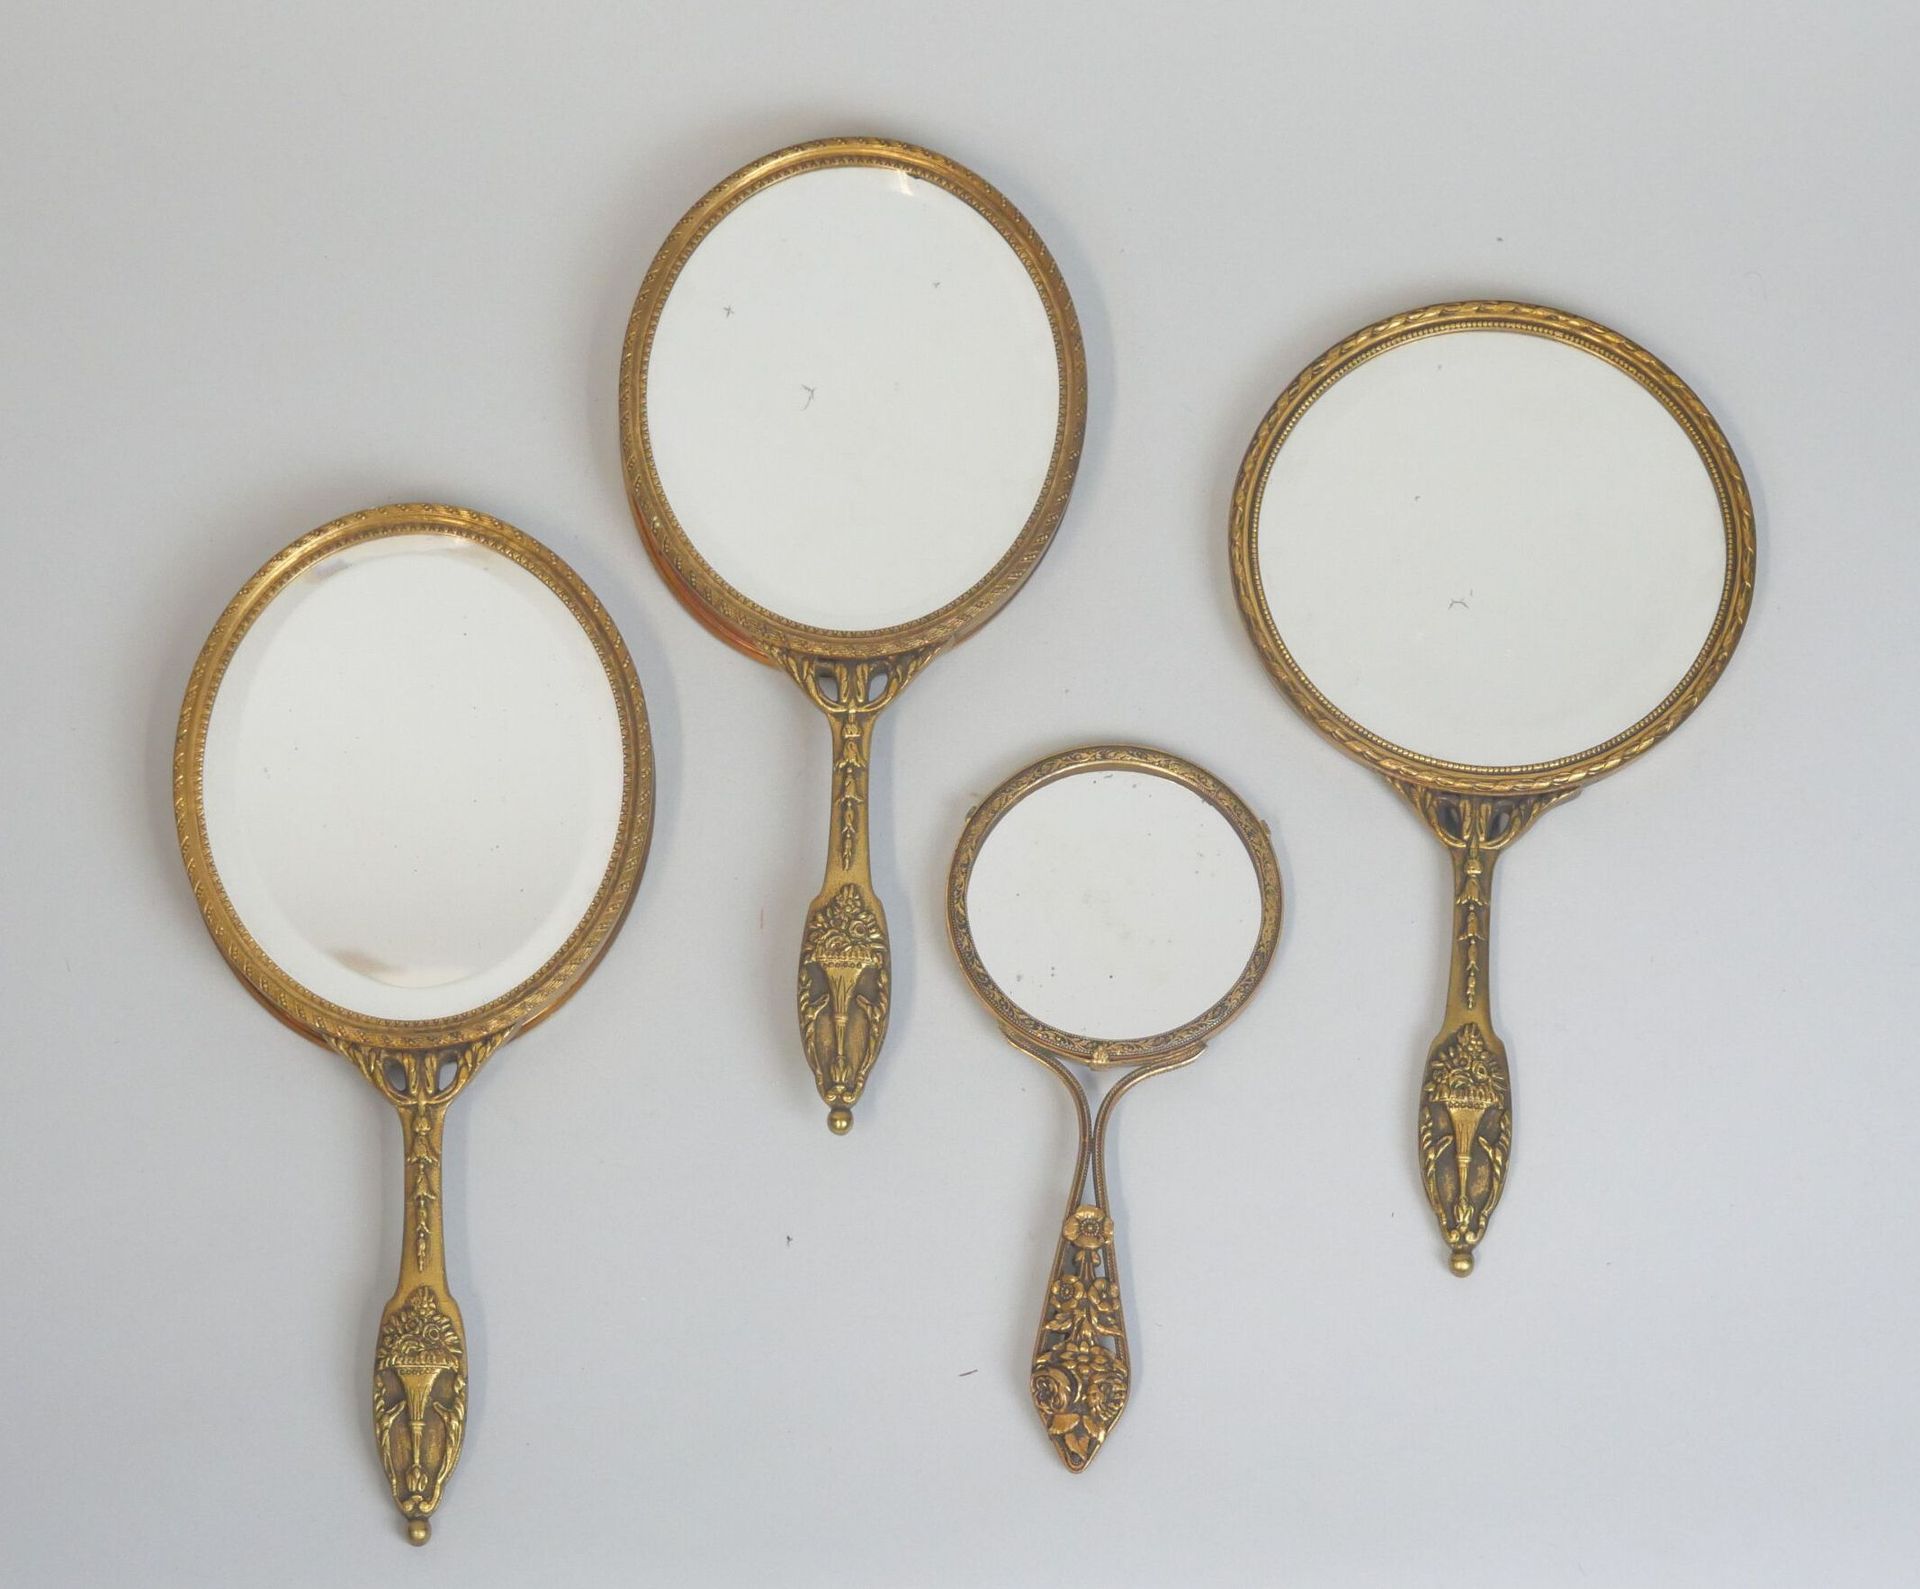 Null Meeting of 4 hand mirrors with silvered bronze mountings:
- 2 of oval form,&hellip;